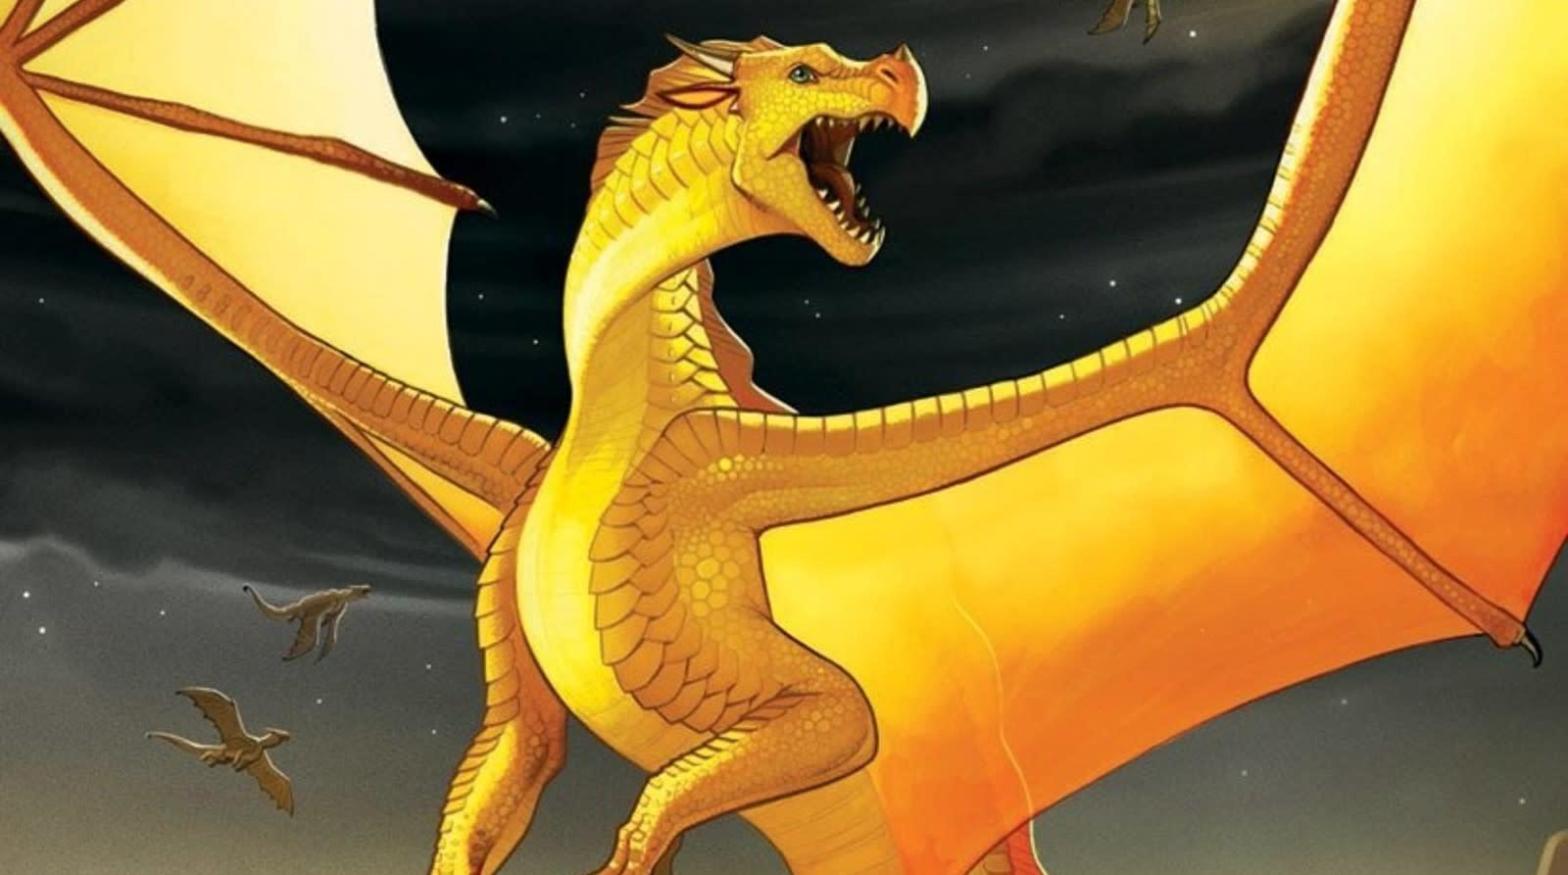 Cover of Wings of Fire: Brightest Night by Phil Falco. (Image: Scholastic)